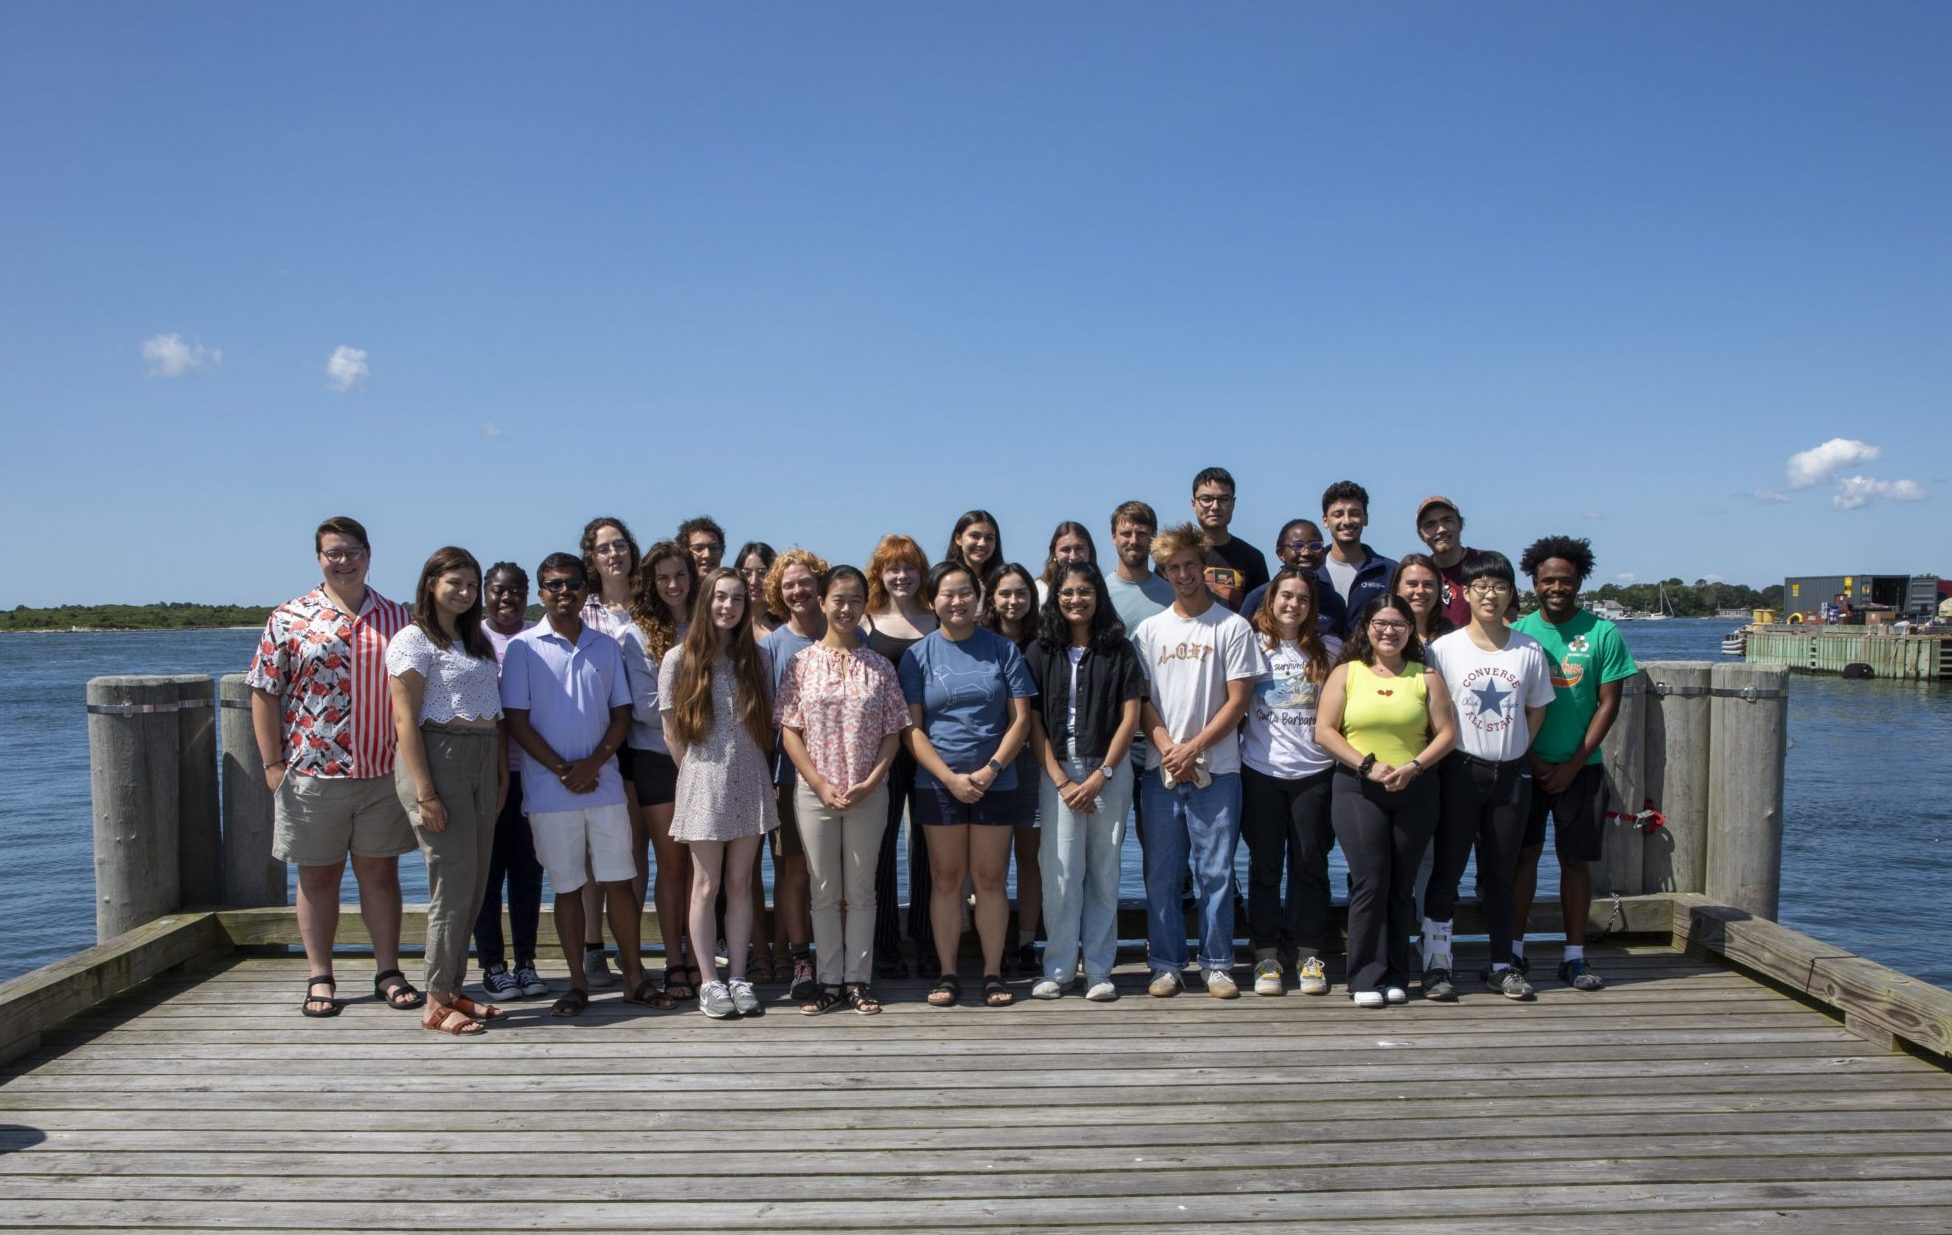 2023 Summer Student Fellows. Twenty-eight students participated in the 2023 fellowship. (Jayne Doucette, WHOI)